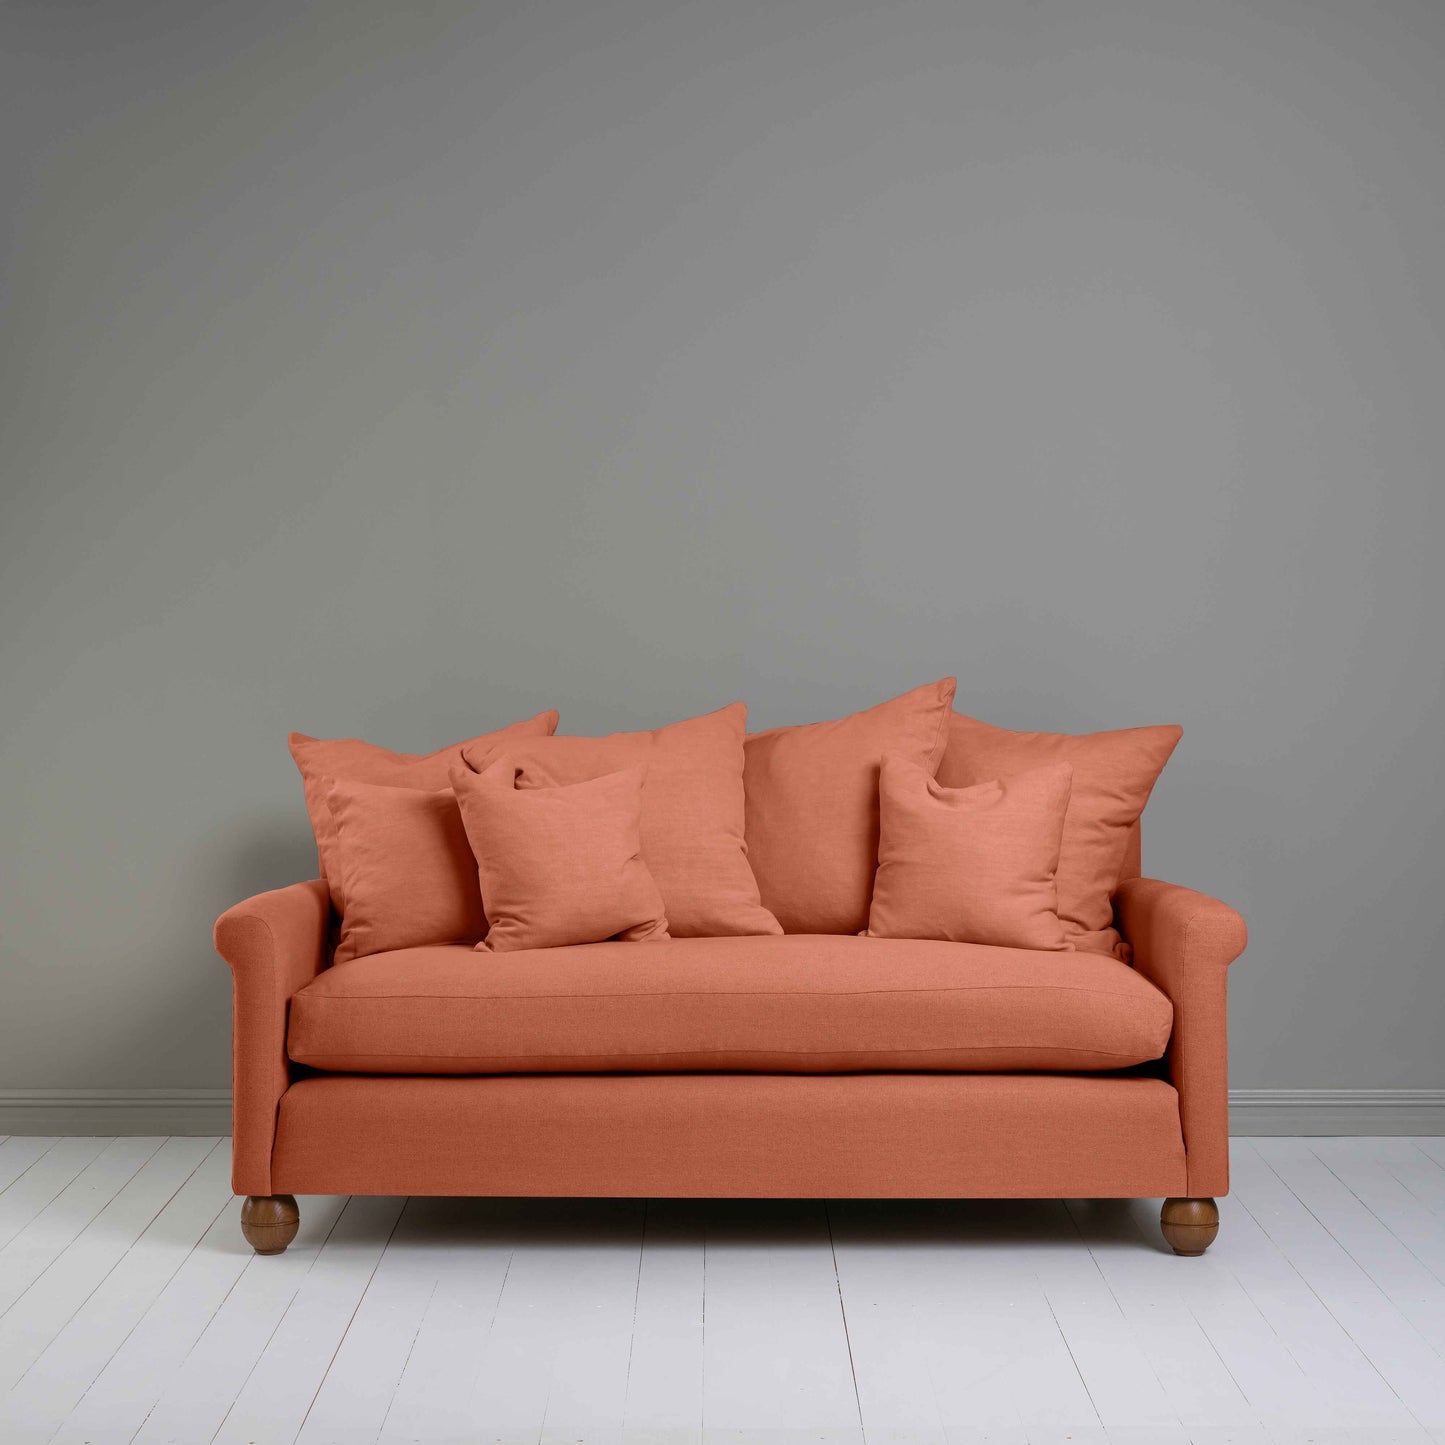 Idler 3 Seater Sofa in Laidback Linen Cayenne